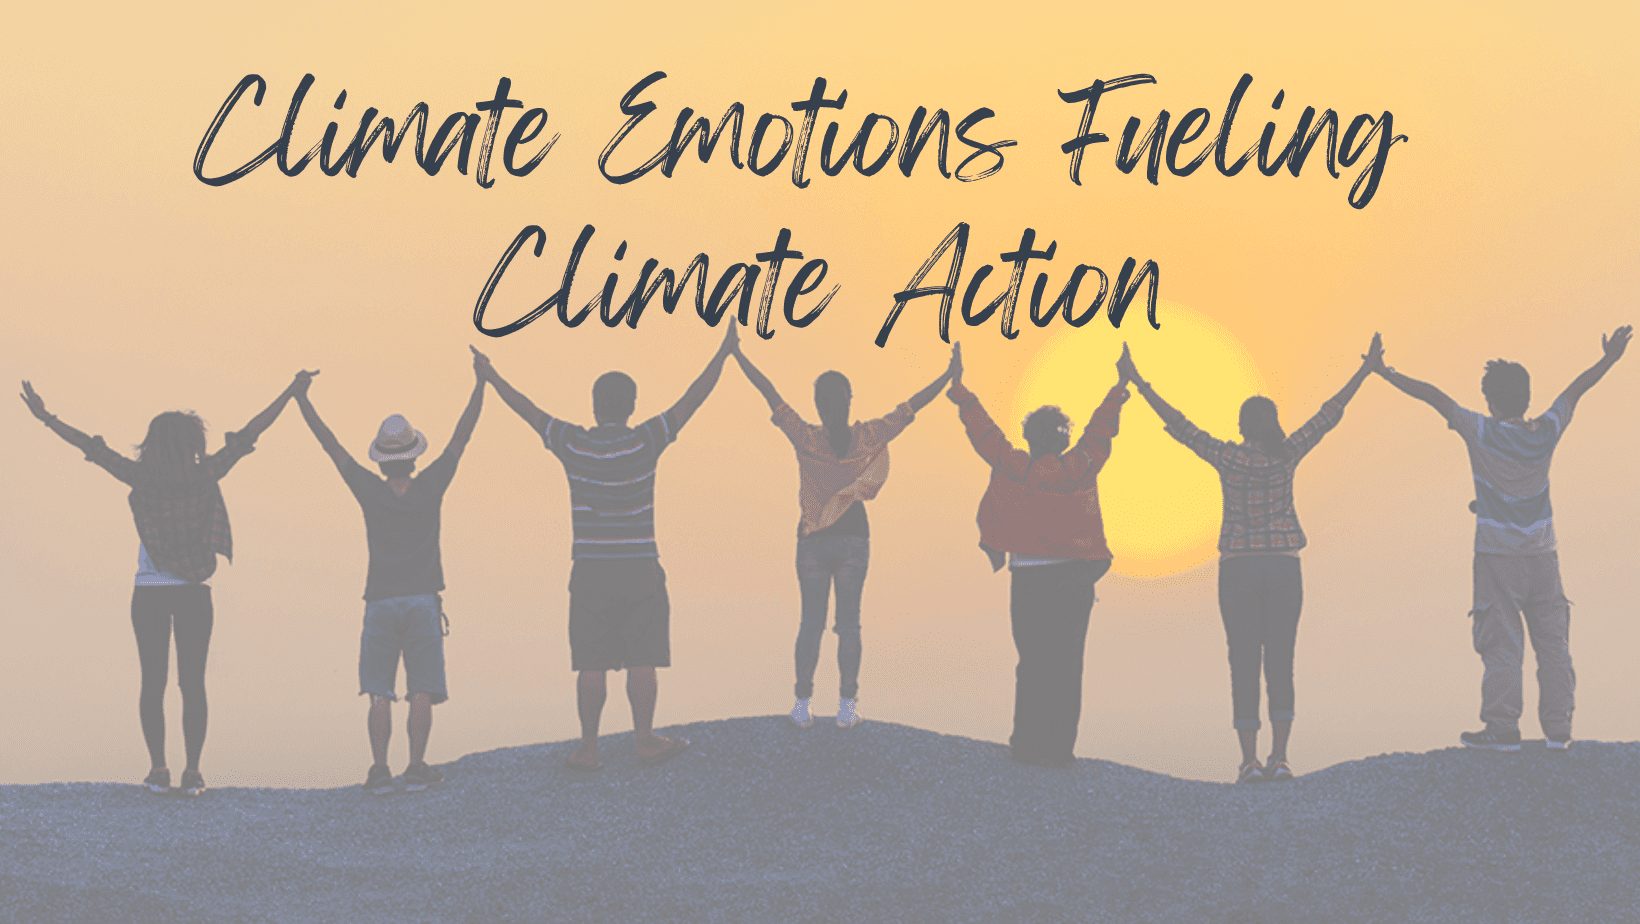 Silhouette of people holding hands with sunset in background. Text in foreground says Climate Emotions Fueling Climate Action.